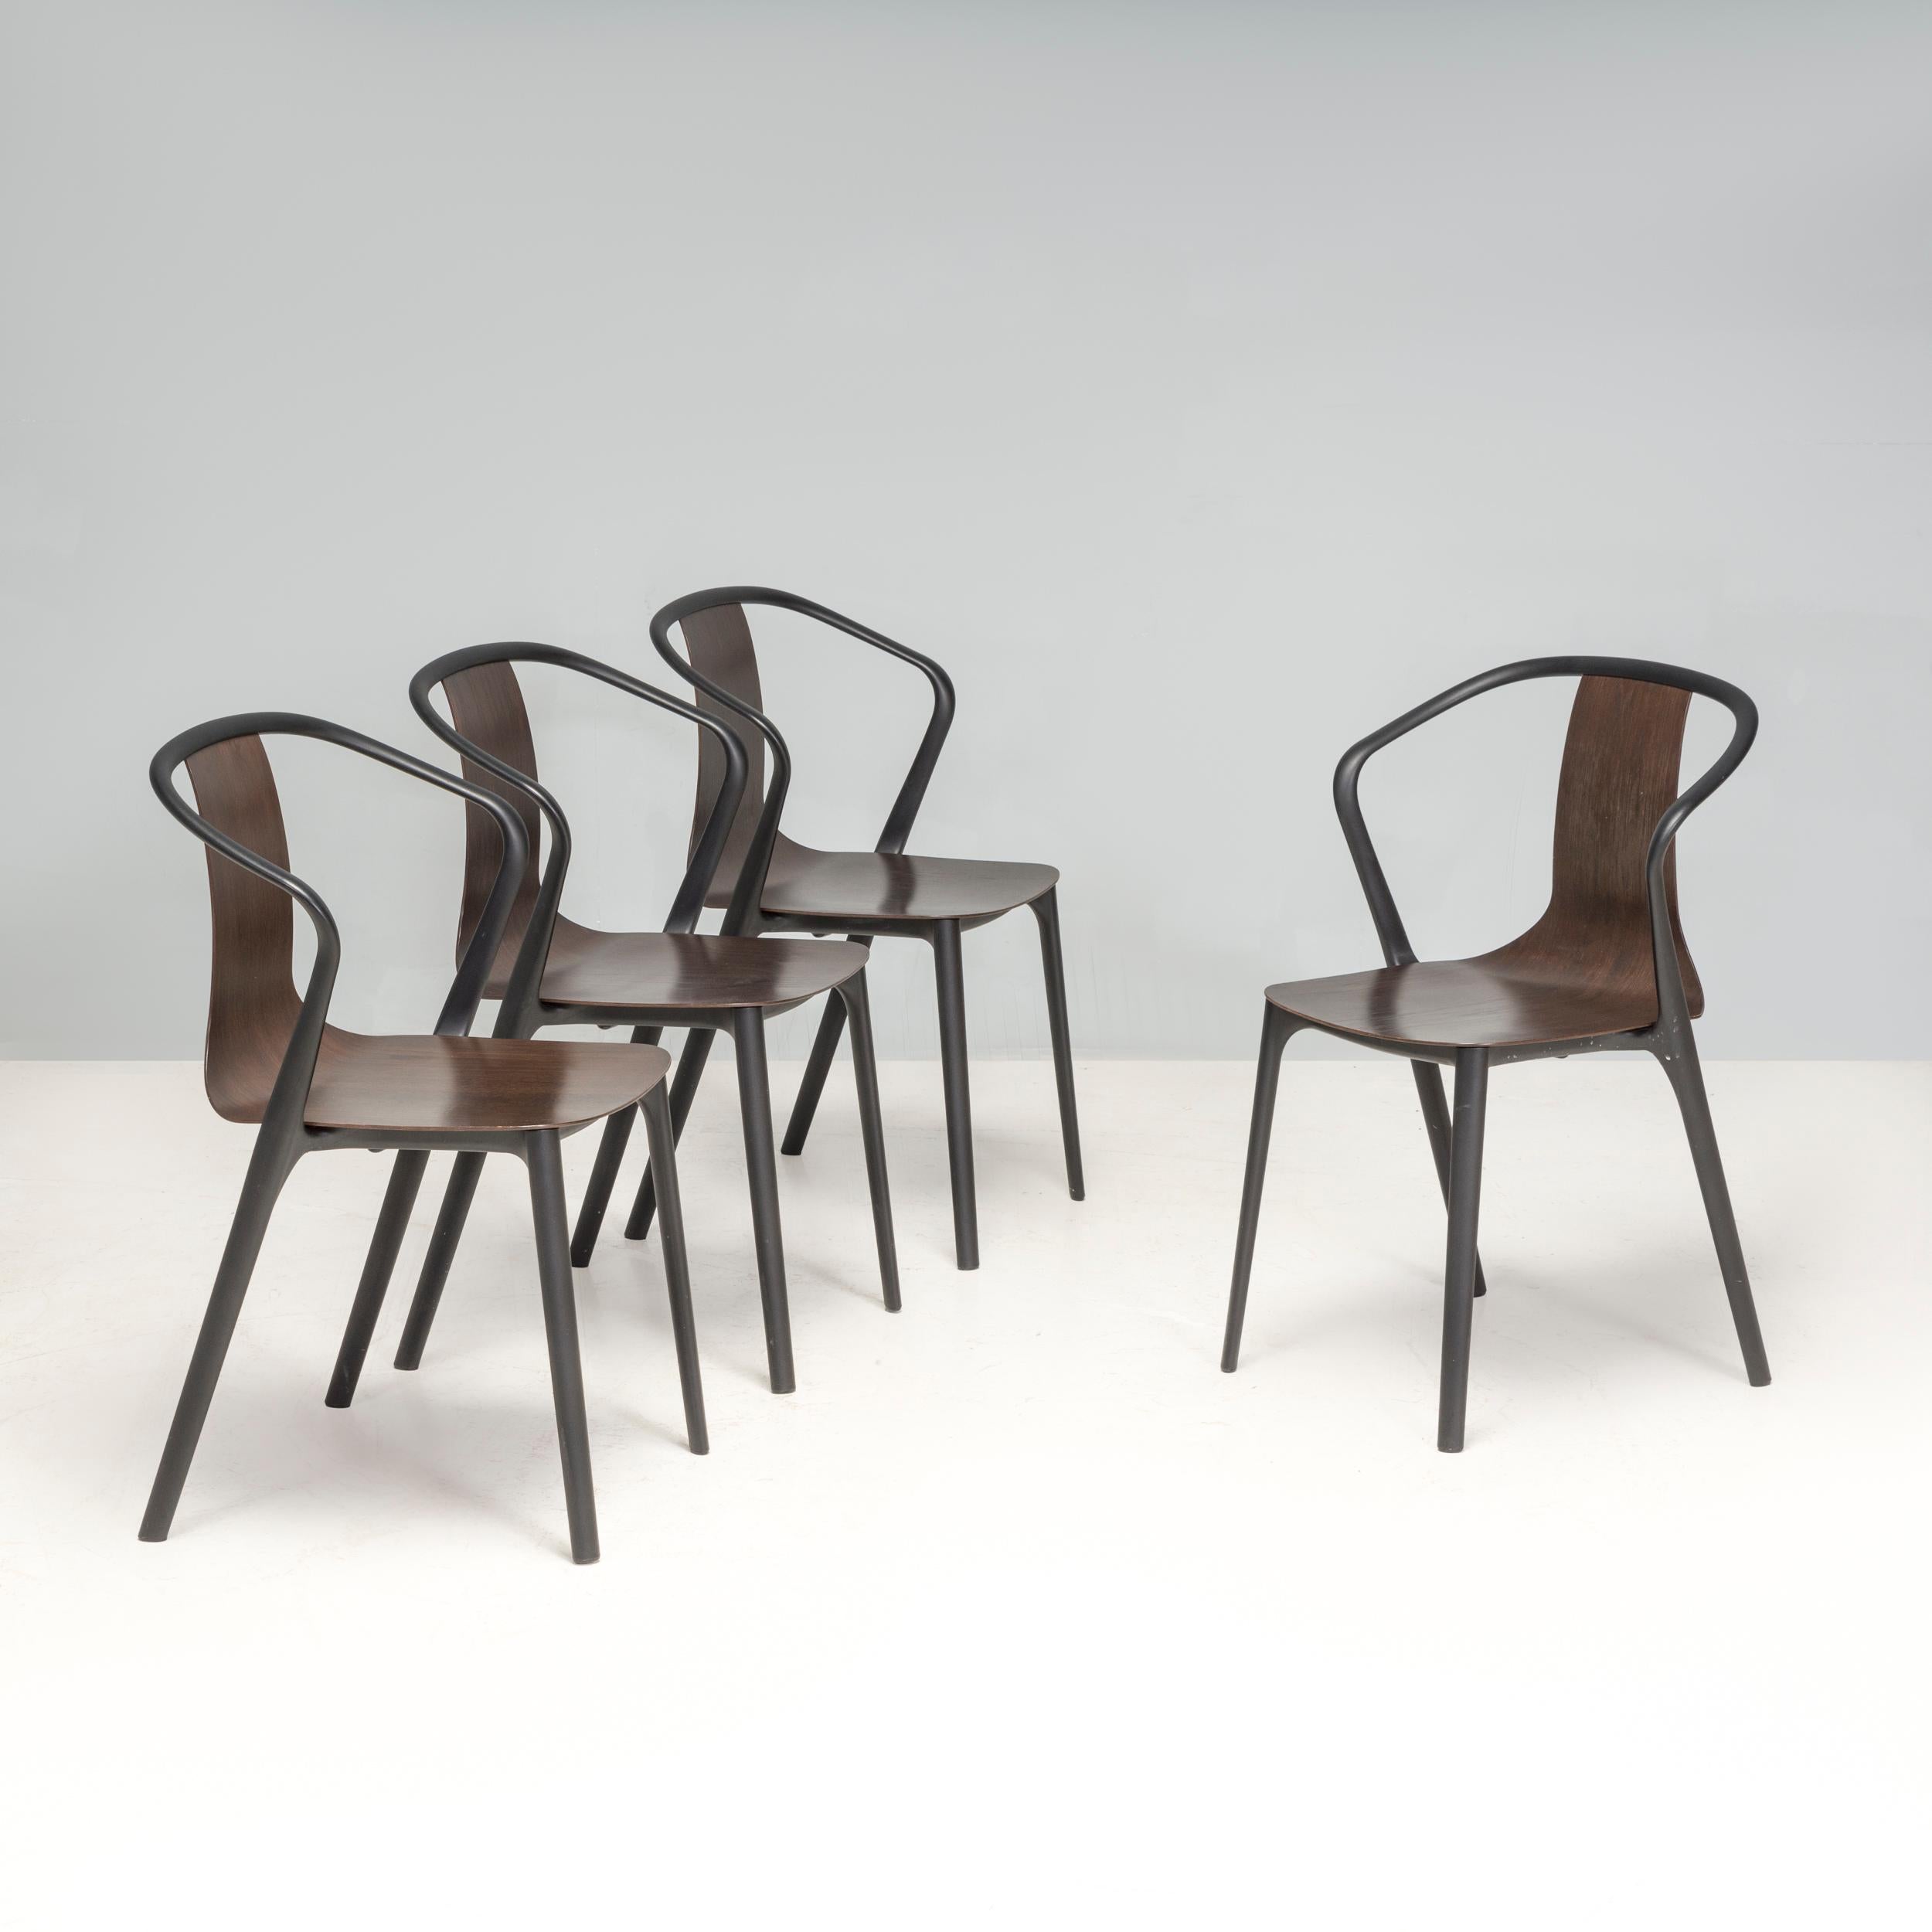 Ronan & Erwan Bouroullec for Vitra Dark Oak Belleville Dining Chairs, Set of 4 In Good Condition For Sale In London, GB